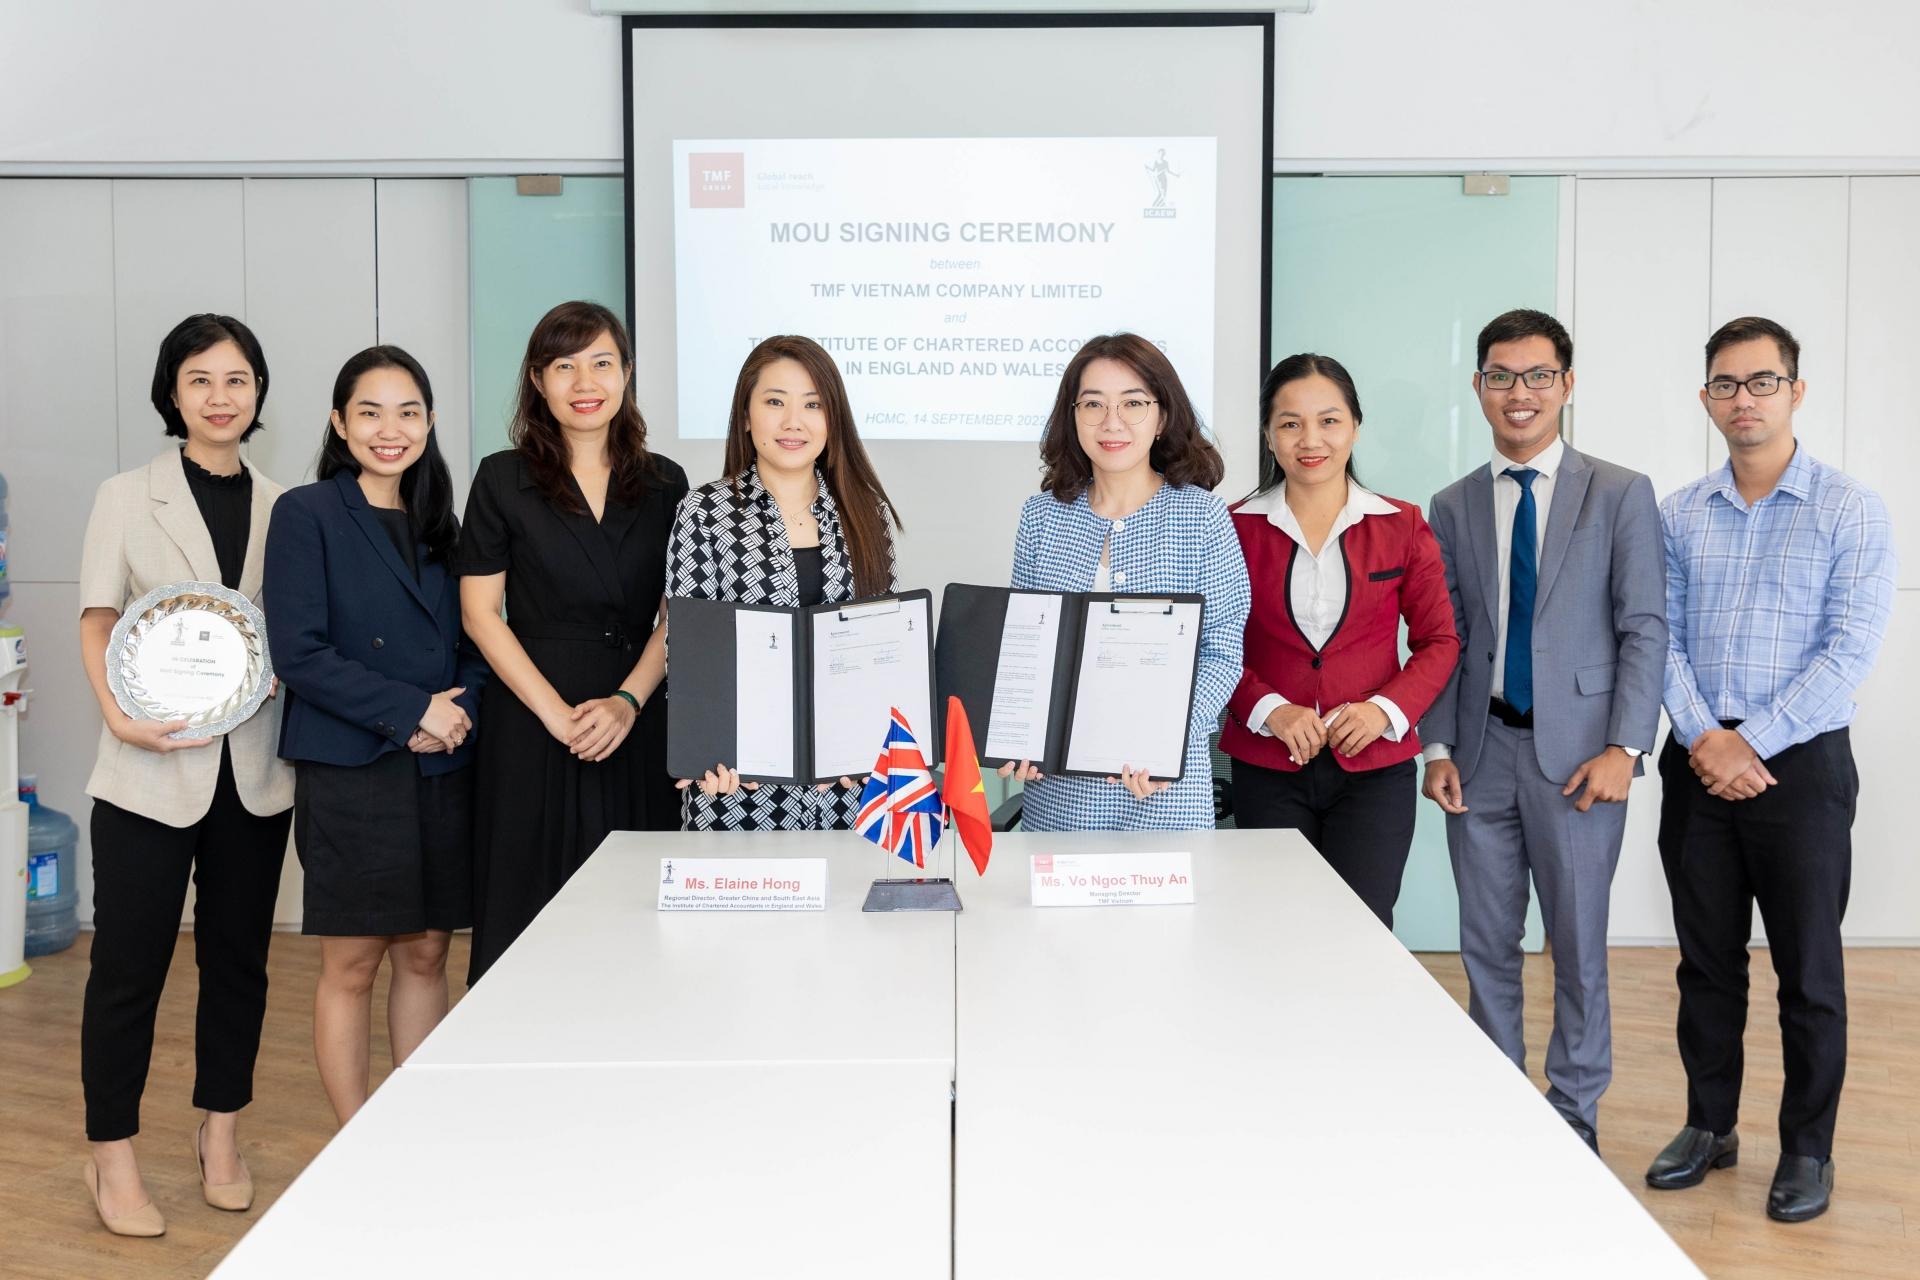 icaew and tmf vietnam cooperate to develop high quality human resources